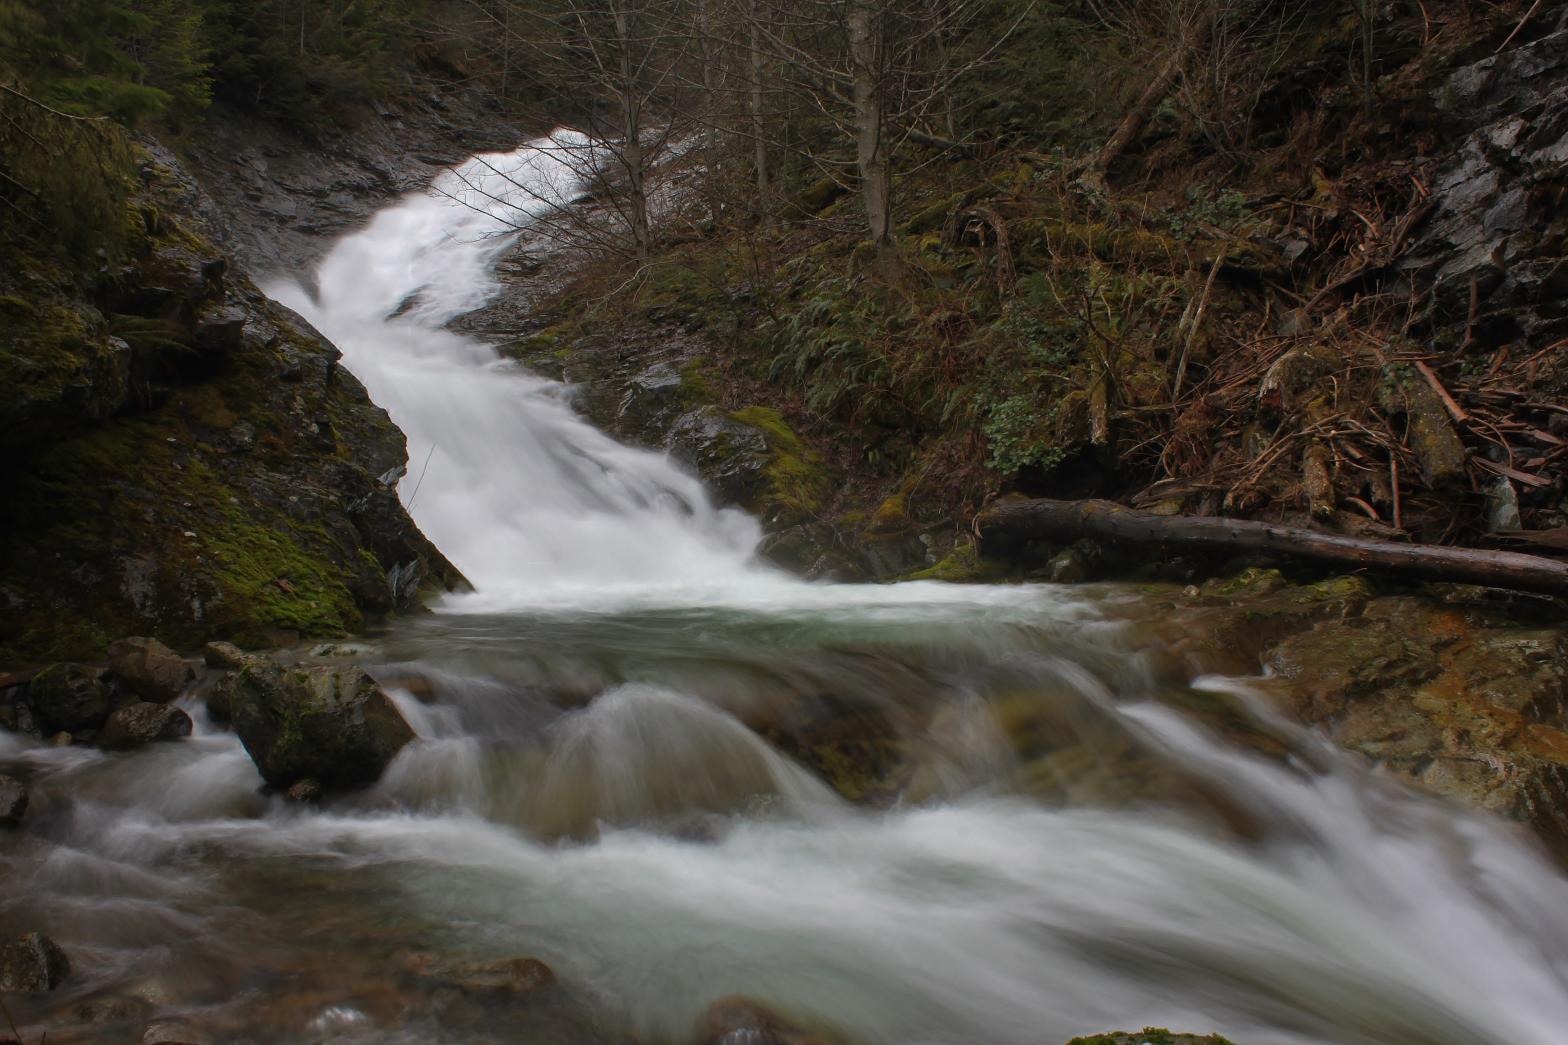 View of Hall Creek Falls from the base